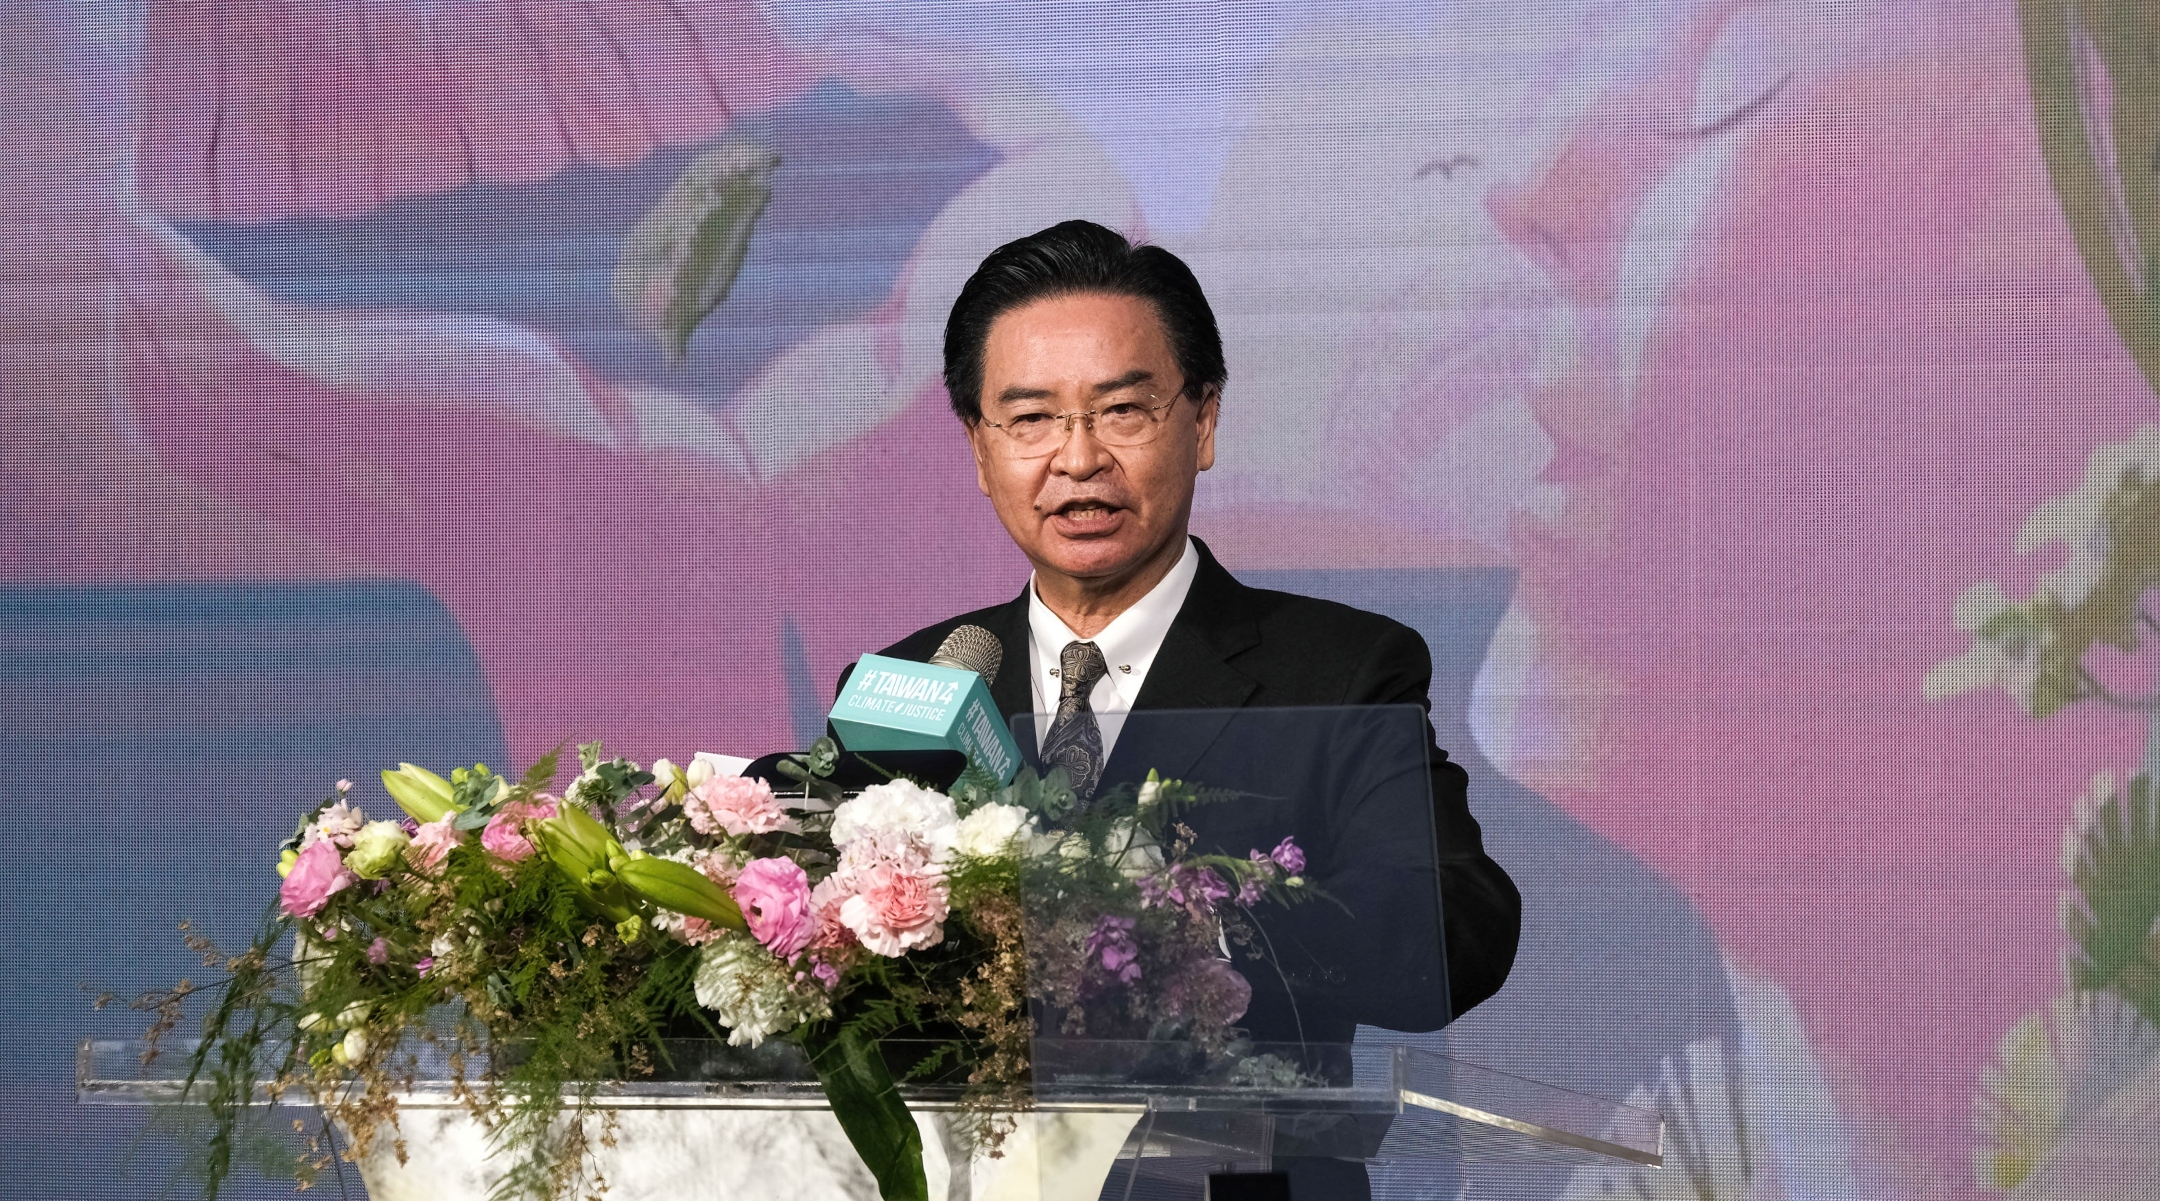 Taiwanese Foreign minister Joseph Wu gives a speech in Taipei, March 8, 2022. (Walid Berrazeg/SOPA Images/LightRocket via Getty Images)